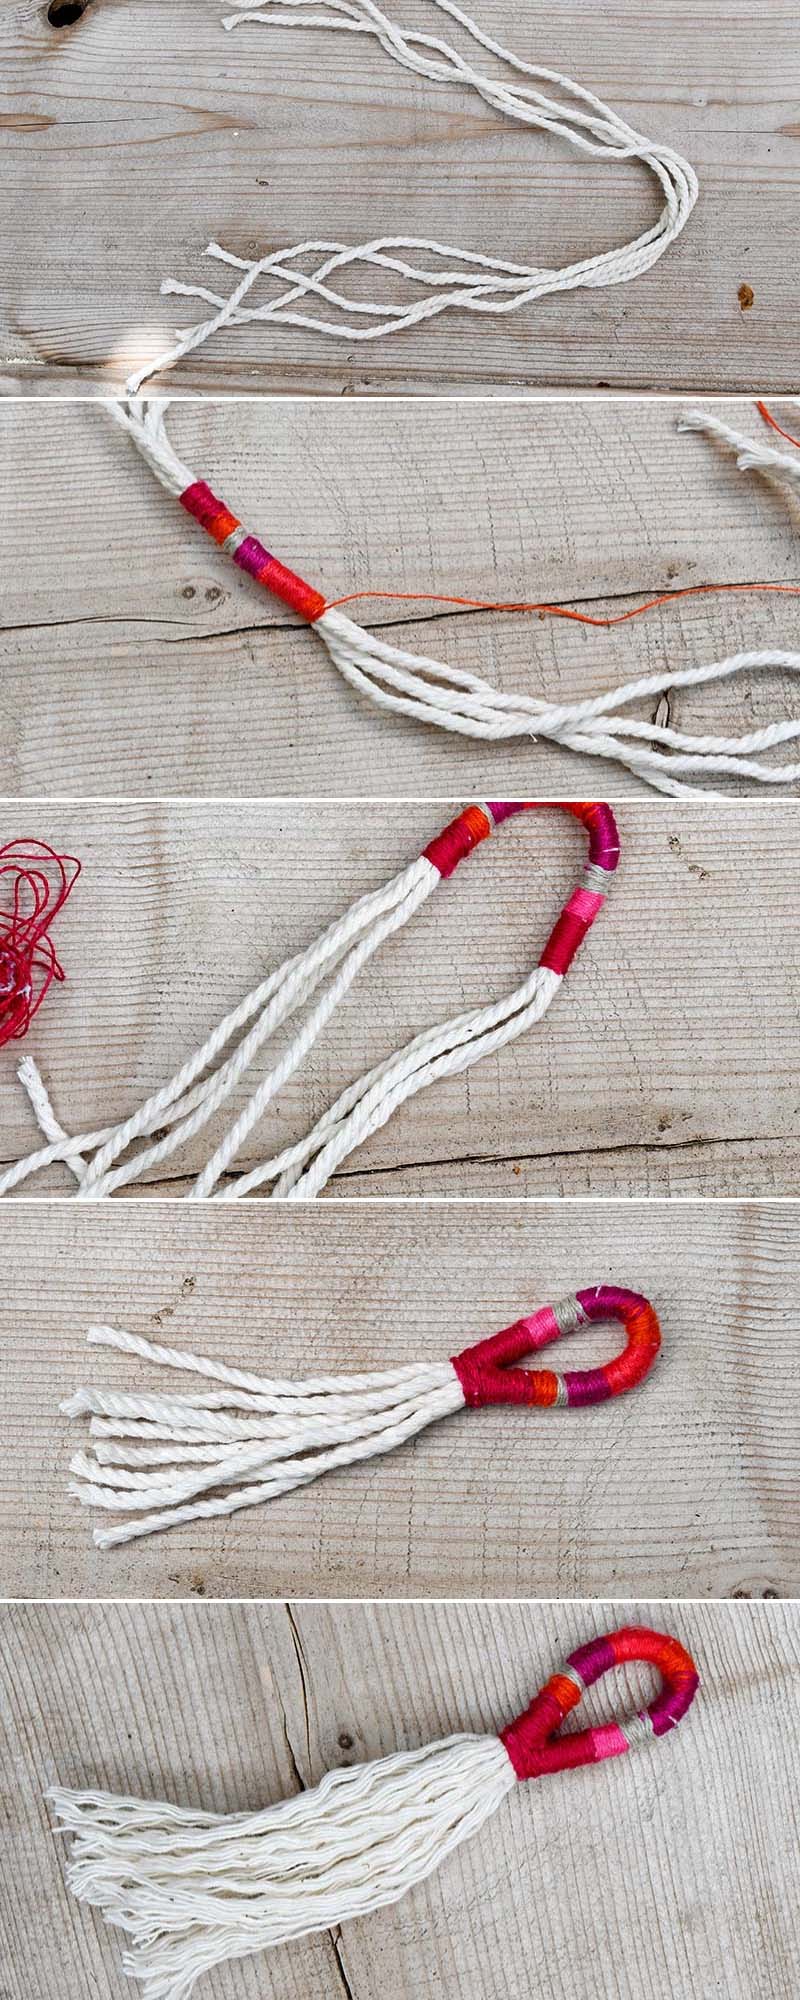 How to make a Boho tassel with string